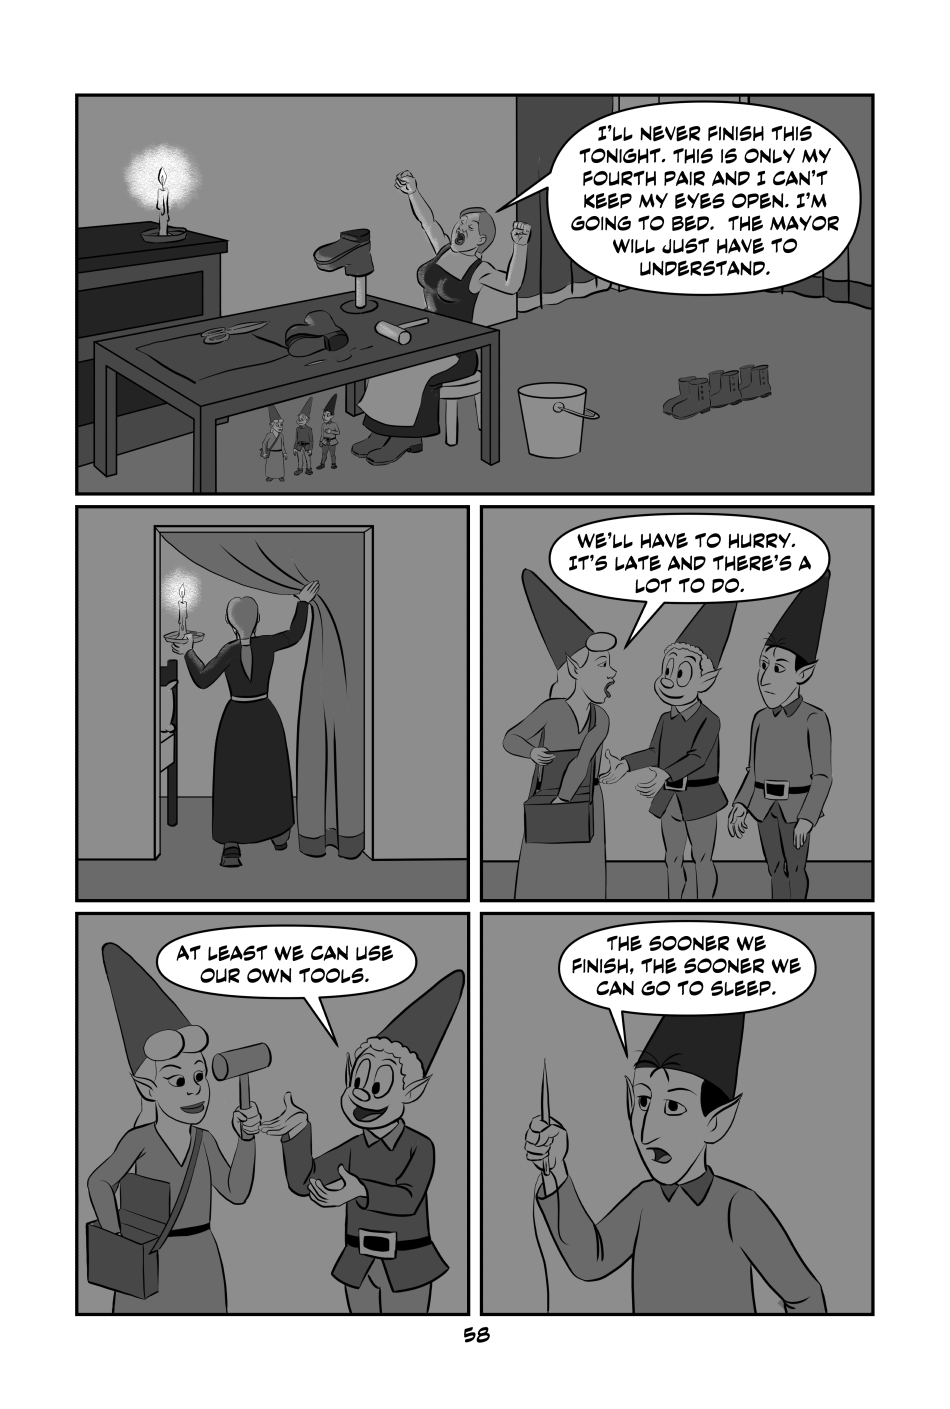 elves page 58